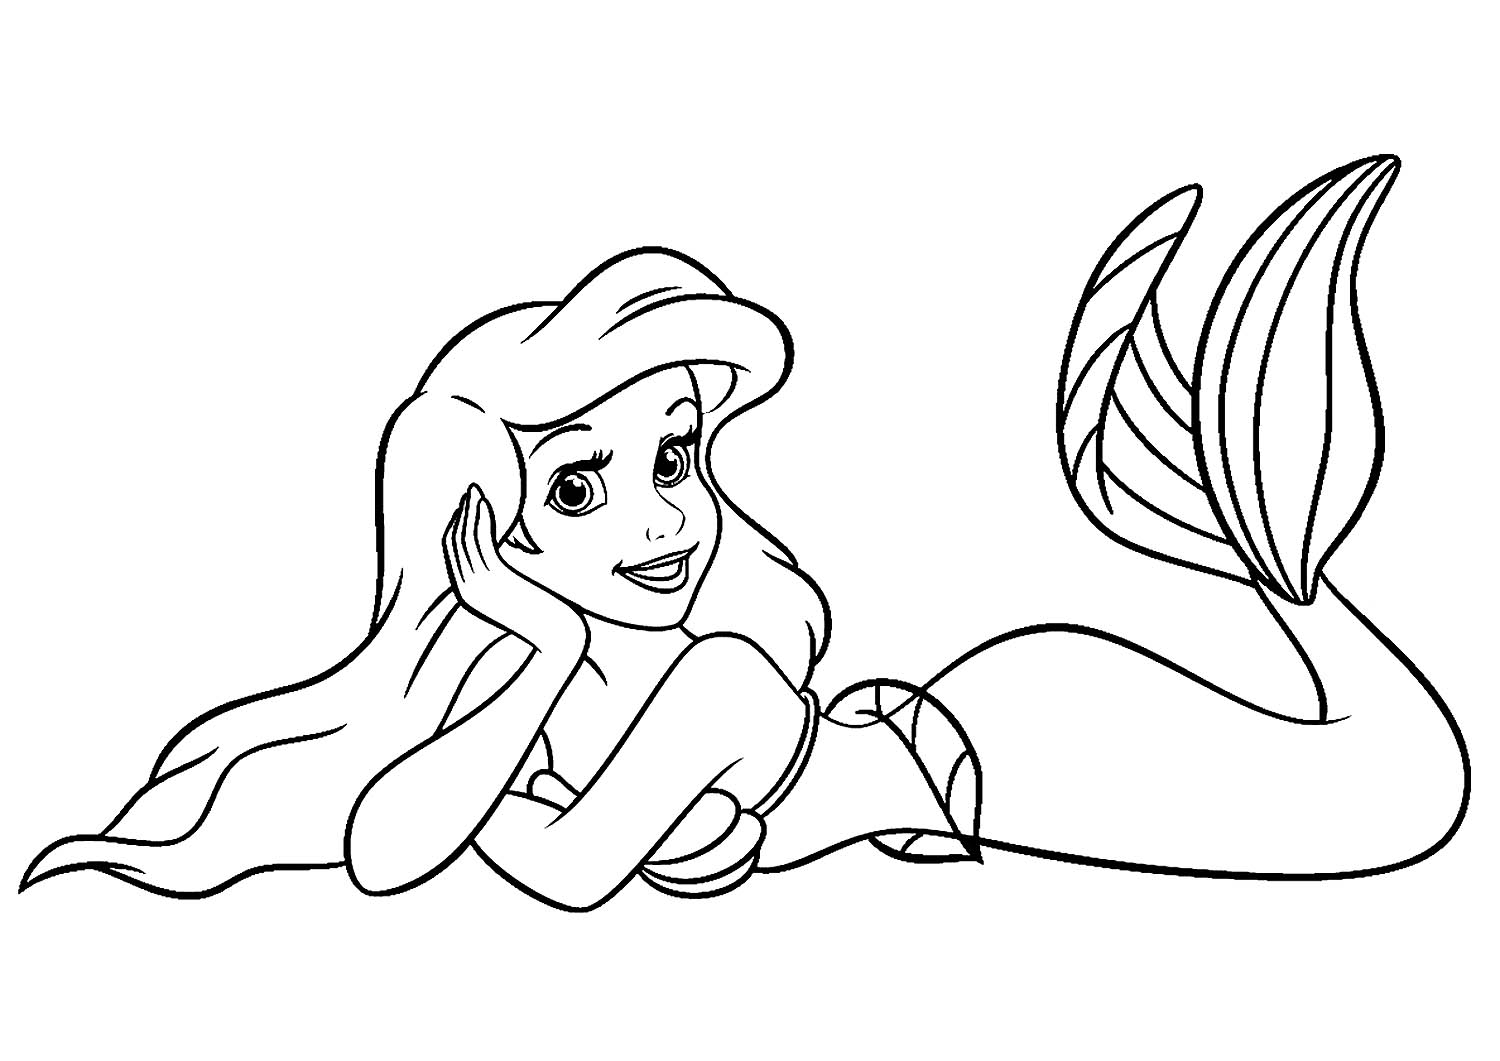 Little Mermaid Coloring Pages | proudvrlistscom